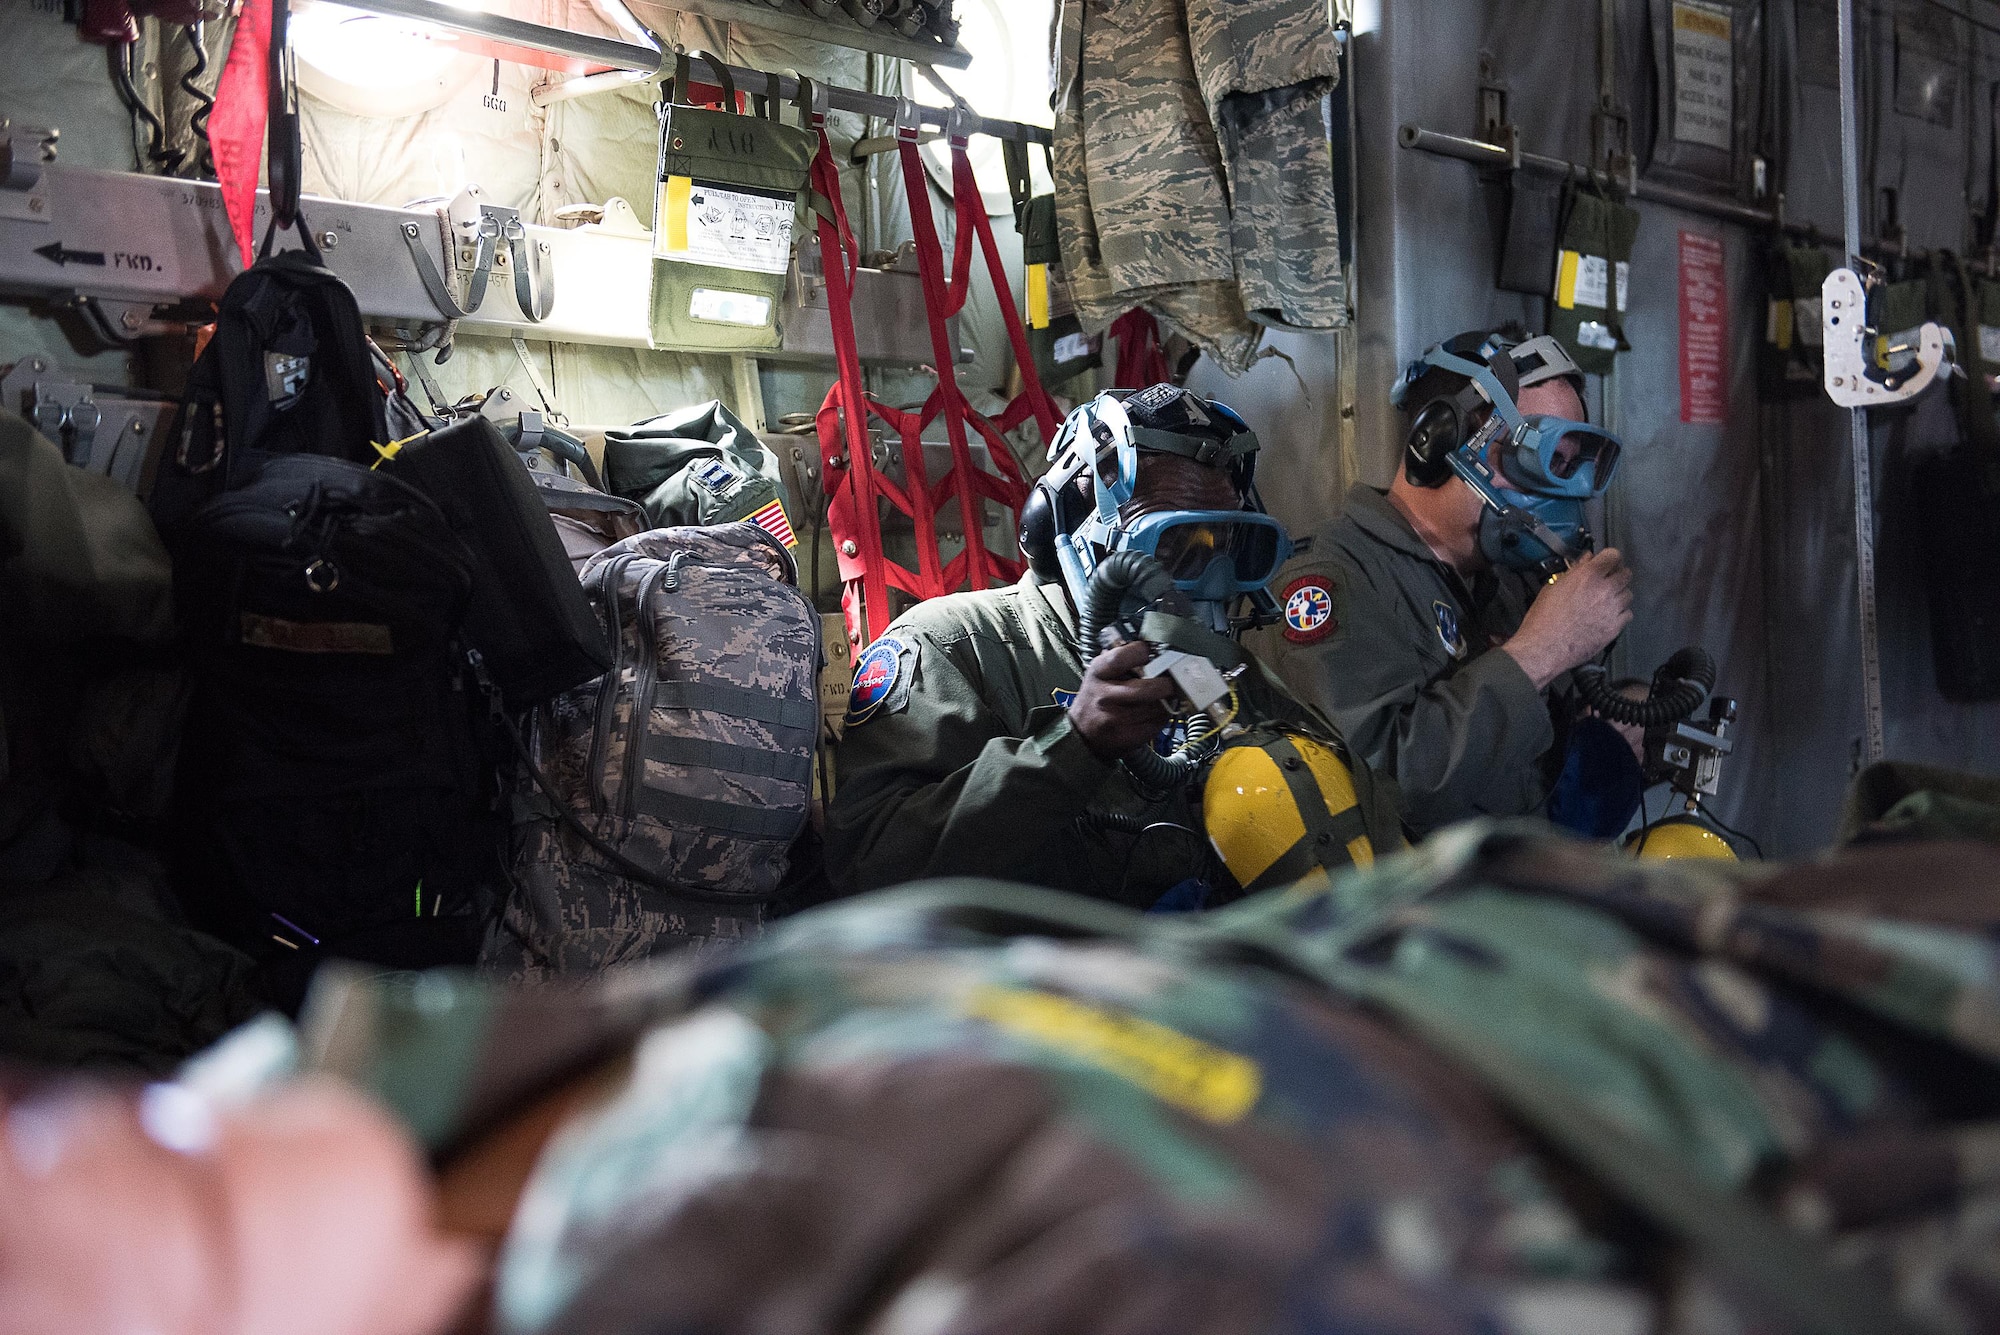 Senior Airman Peter Irungu from the 142nd Aeromedical Evacuation Squadron, Delaware Air National Guard, and Capt. Daniel Zico, 137 AES, Oklahoma Air National Guard, don oxygen masks during a simulated fire aboard a C-130 Hercules during the Multiple Aircraft Training Opportunity Program (MATOP) organized by the 137th Aeromedical Evacuation Squadron from Will Rogers Air National Guard Base, Oklahoma City, April 7, 2017. Airmen of the 137 AES were joined by eight of the nine Air National Guard aeromedical evacuation squadrons as they hosted the annual training event and accomplished mandatory annual aeromedical training requirements. (U.S. Air National Guard photo by Capt. Micah D. Campbell/Released)